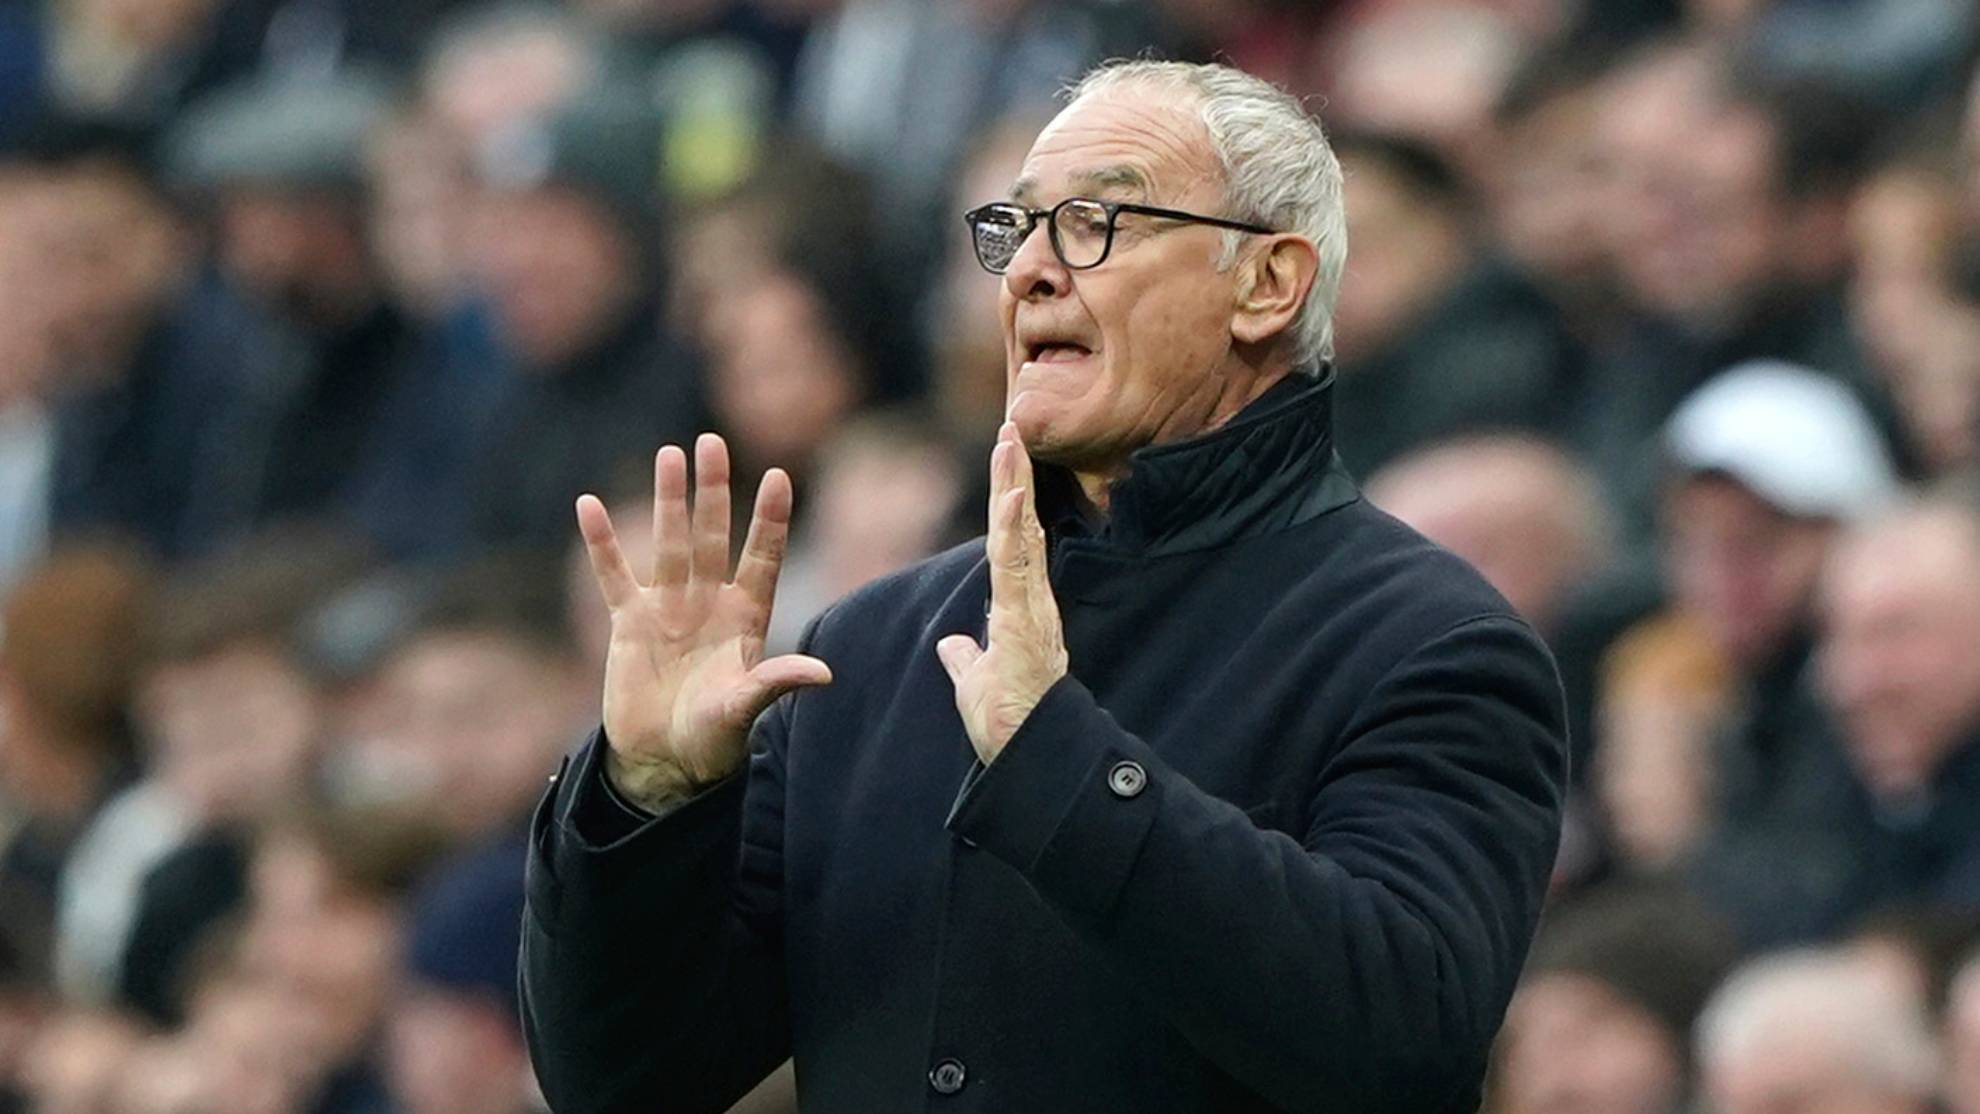 Is Claudio Ranieri's job at Watford under threat? This was how he responded